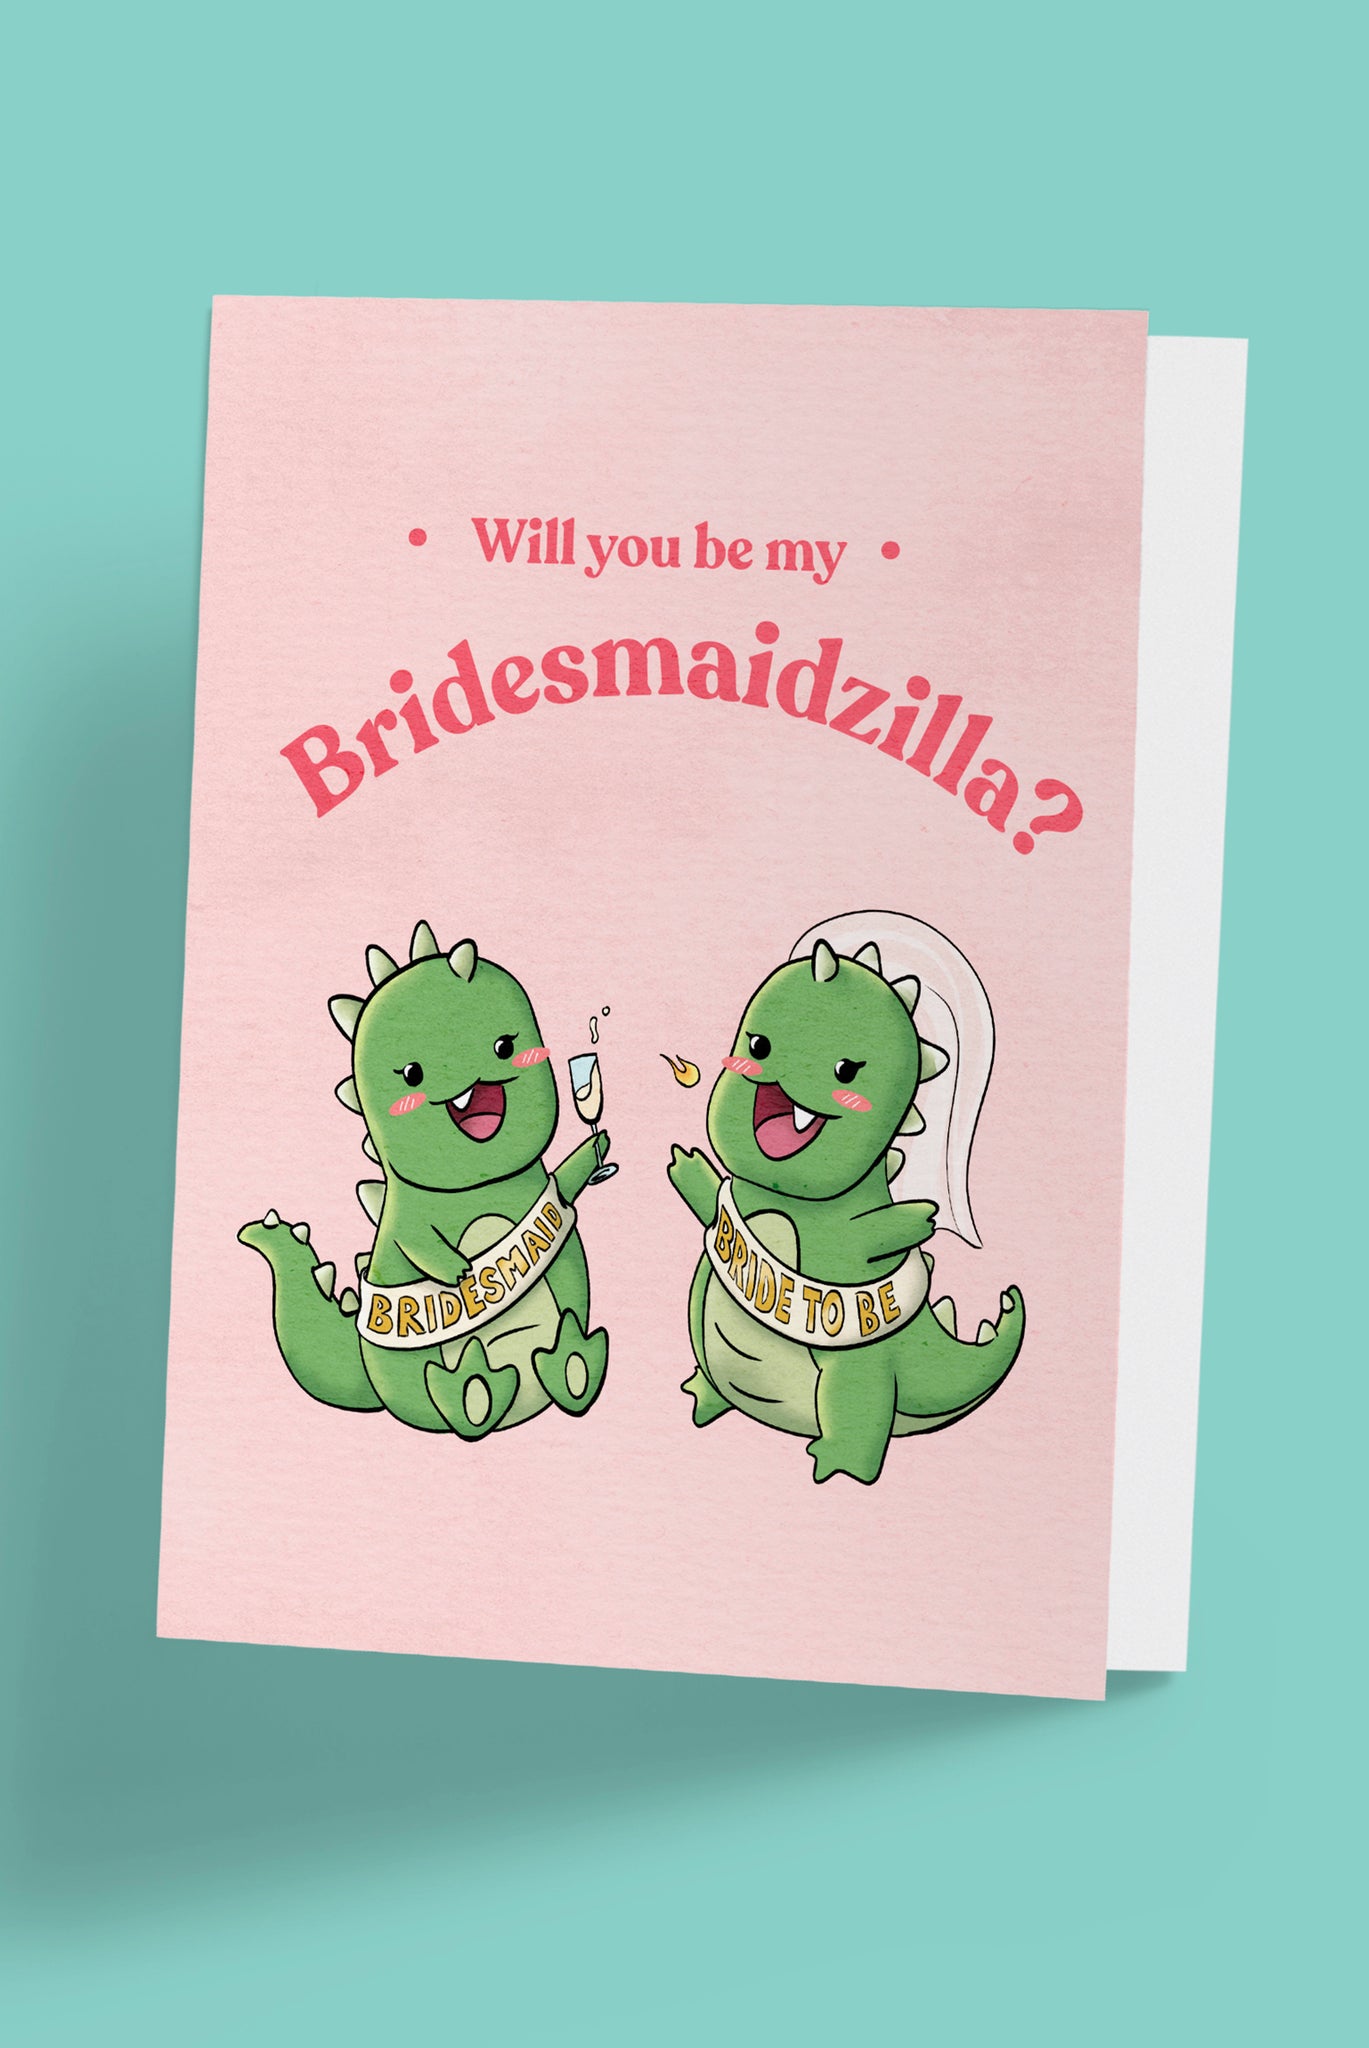 Pink Bridesmaid Proposal Card for the Bridezilla Bride to be. Cute Dragons with Bride to be Sash